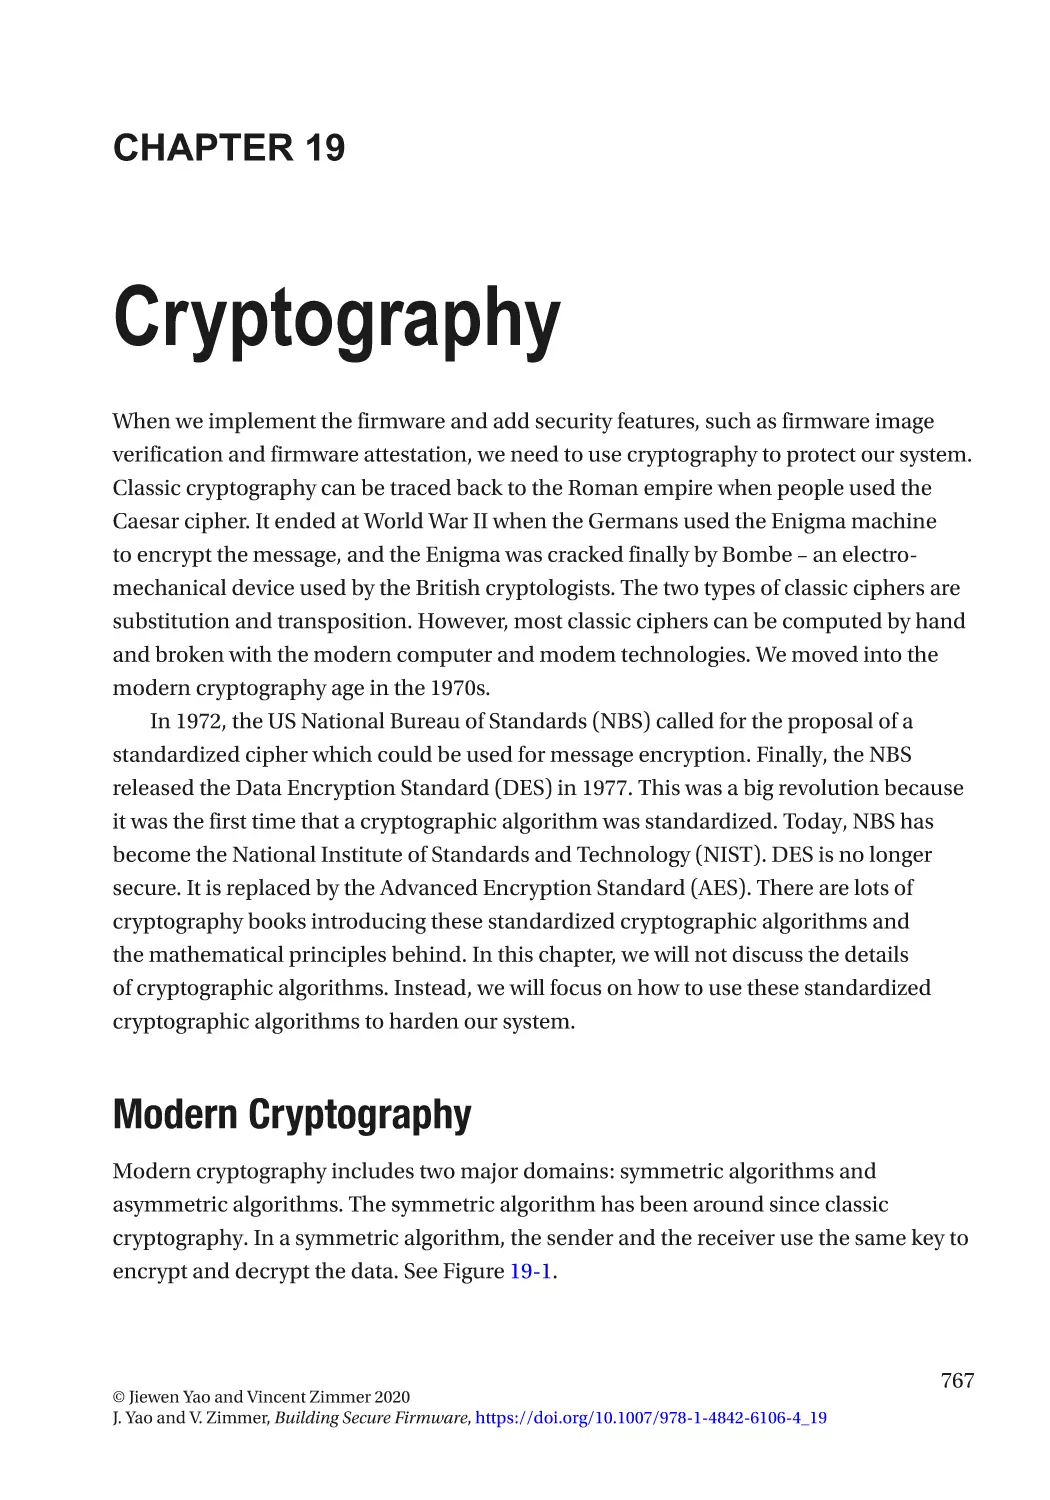 Chapter 19
Modern Cryptography